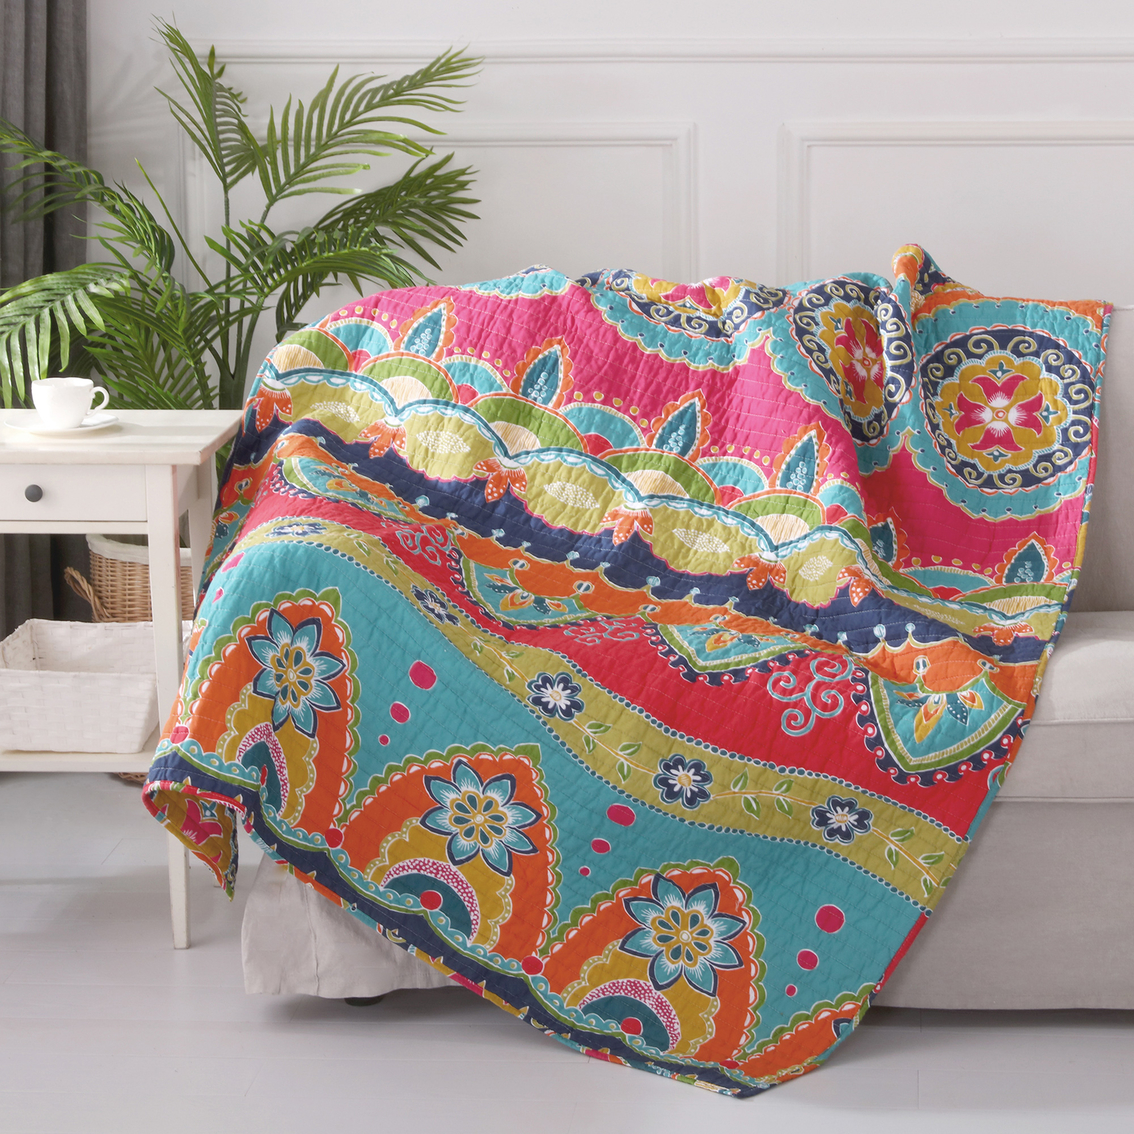 Levtex Home Amelie Quilted Throw 50 in. x 60 in. - Image 2 of 2